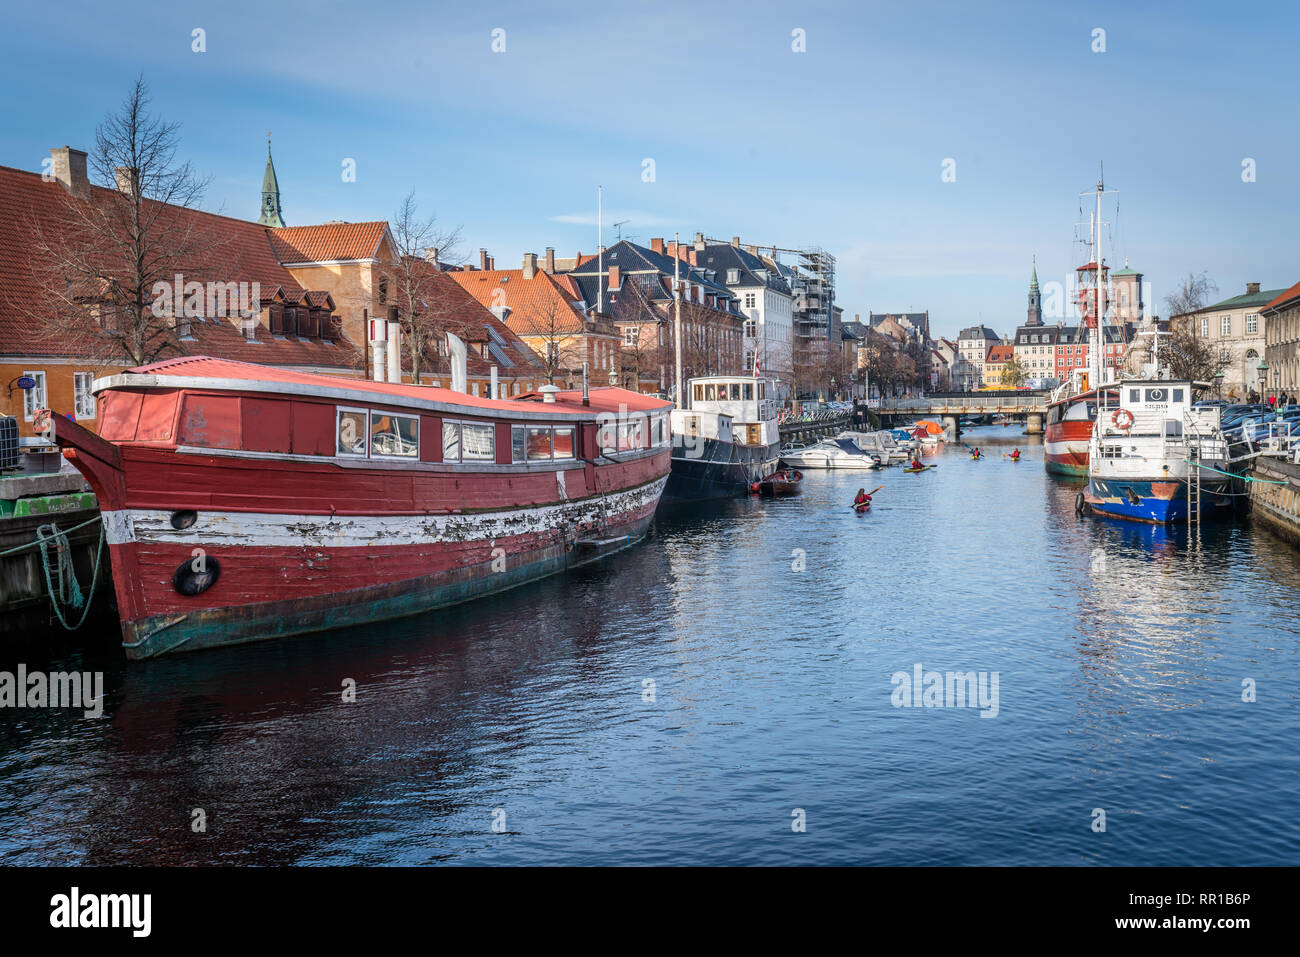 Colorful boats on the canal with kayakers in Nyhavn Copenhagen Stock Photo